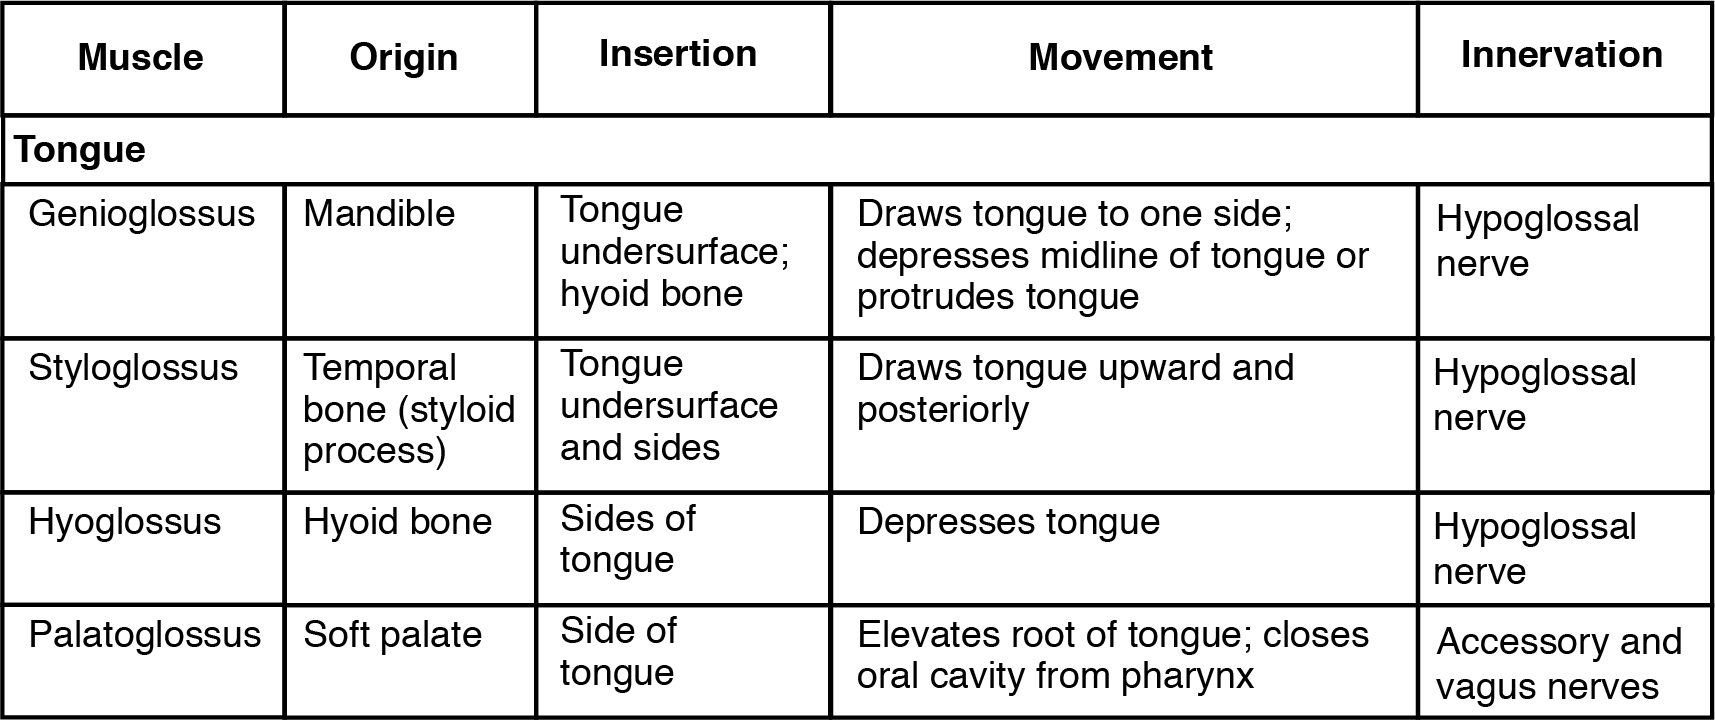 This table describes the muscles used in tongue movement, swallowing, and speech. The genioglossus moves the tongue down and sticks the tongue out of the mouth. It originates in the mandible. The styloglossus moves the tongue up and retracts the tongue back into the mouth. It originates in the temporal bone. The hyoglossus flattens the tongue. It originates in the hyoid bone. The palatoglossus bulges the tongue. It originates in the soft palate. The digastric raises the hyoid bone in a way that also raises the larynx, allowing the epiglottis to cover the glottis during deglutition; it also assists in opening the mouth by depressing the mandible. It originates in the mandible and temporal bone. The stylohyoid raises and retracts the hyoid bone in a way that elongates the oral cavity during deglutition. It originates in the temporal bone. The mylohyoid raises the hyoid bone in a way that presses the tongue against the roof of the mouth, pushing food back into the pharynx during deglutition. It originates in the mandible. The geniohyoid raises and moves the hyoid bone forward, widening the pharynx during deglutition. It originates in the mandible. The ornohyoid retracts the hyoid bone and moves it down during later phases of deglutition. It originates in the scapula. The sternohyoid depresses the hyoid bone during swallowing and speaking. It originates in the clavicle. The thyrohyoid shrinks the distance between thyroid cartilage and the hyoid bone, allowing production of high-pitch vocalizations. It originates in the hyroid cartilage. The sternothyroid depresses the larynx, thyroid cartilage, and hyoid bone to create different vocal tones. It originates in the sternum. The sternocleidomastoid and semispinalis capitis rotate and tilt the head to the side and forward. They originate in the sternum and clavicle. The splenius capitis and longissimus capitis rotate and tilt the head to the side and backwards.